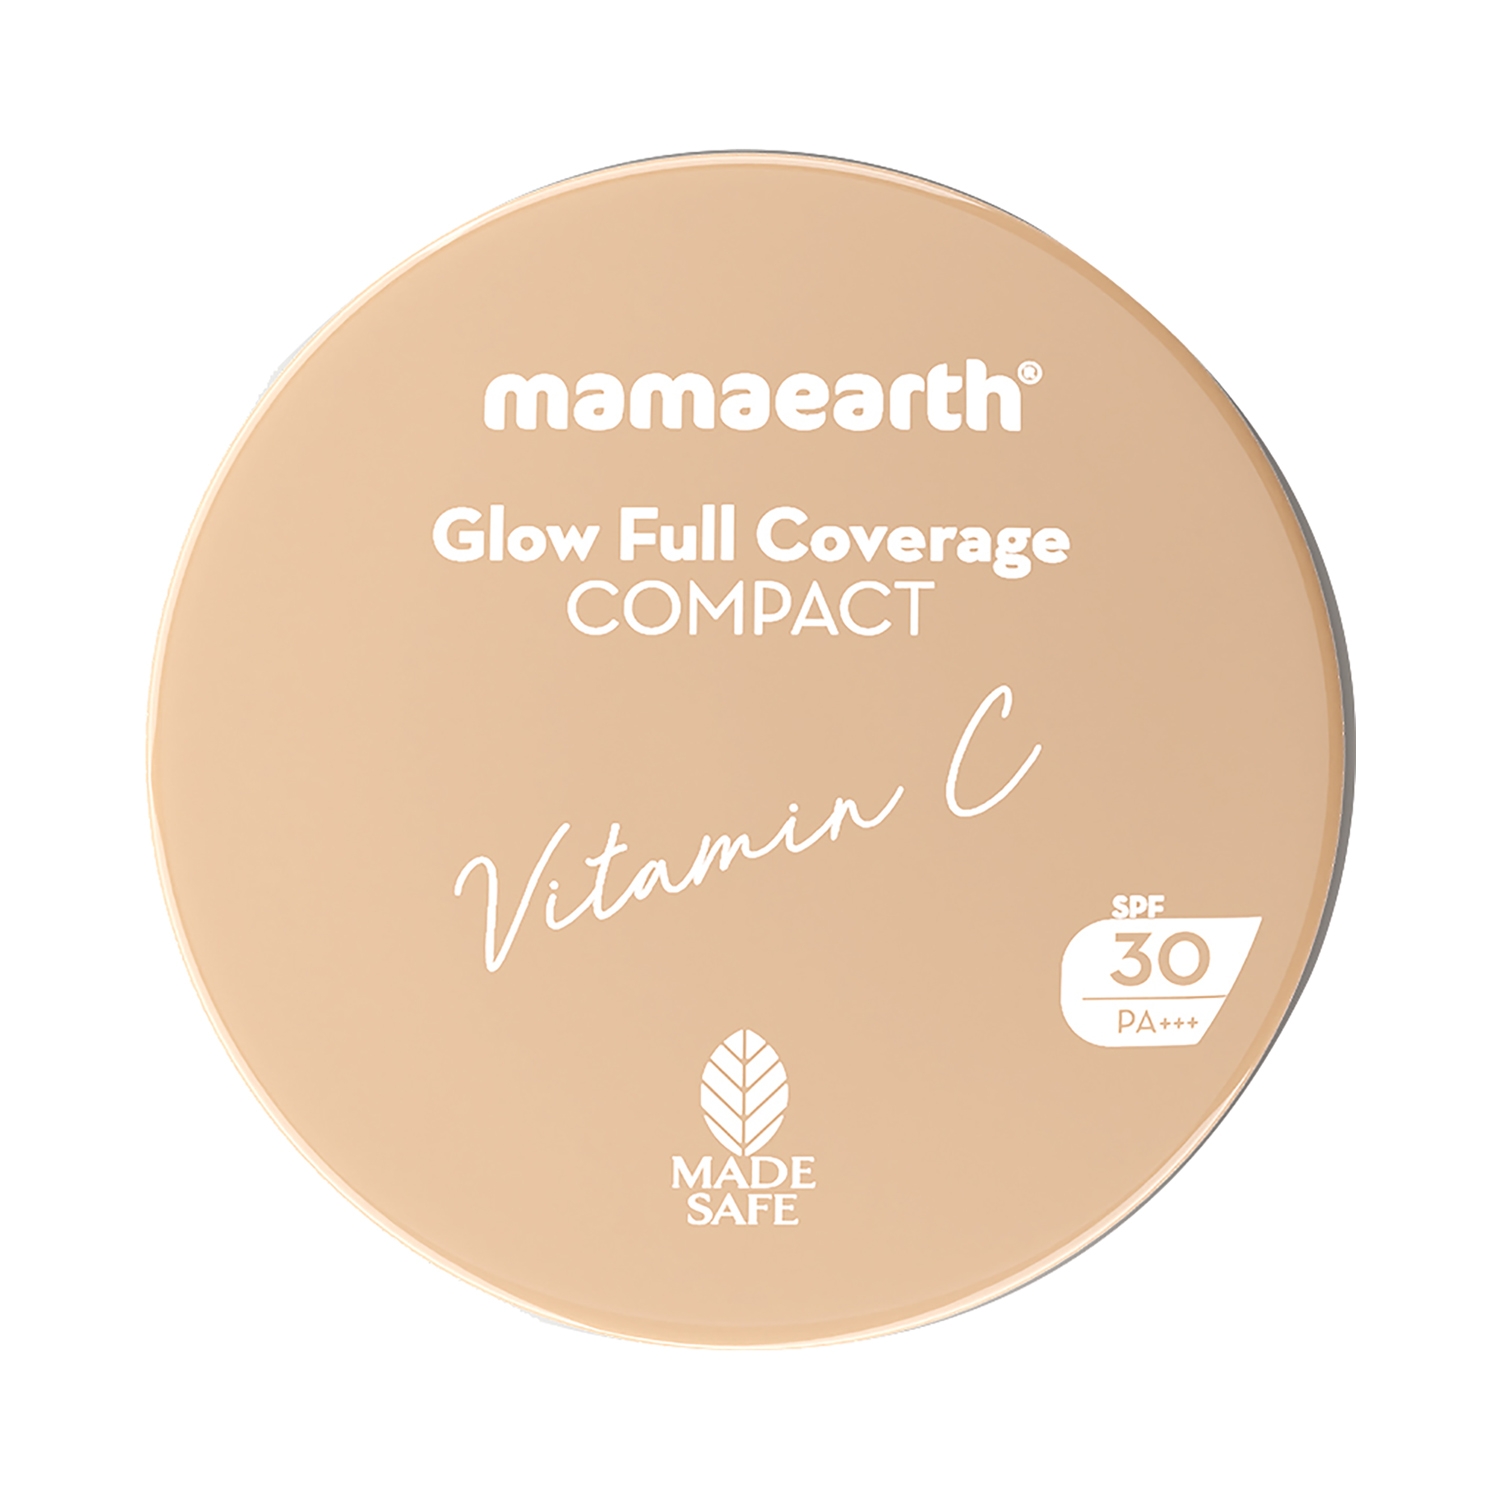 Mamaearth | Mamaearth Glow Full Coverage Compact SPF 30 PA+++ With Vitamin C - 01 Pearl Glow (9g)